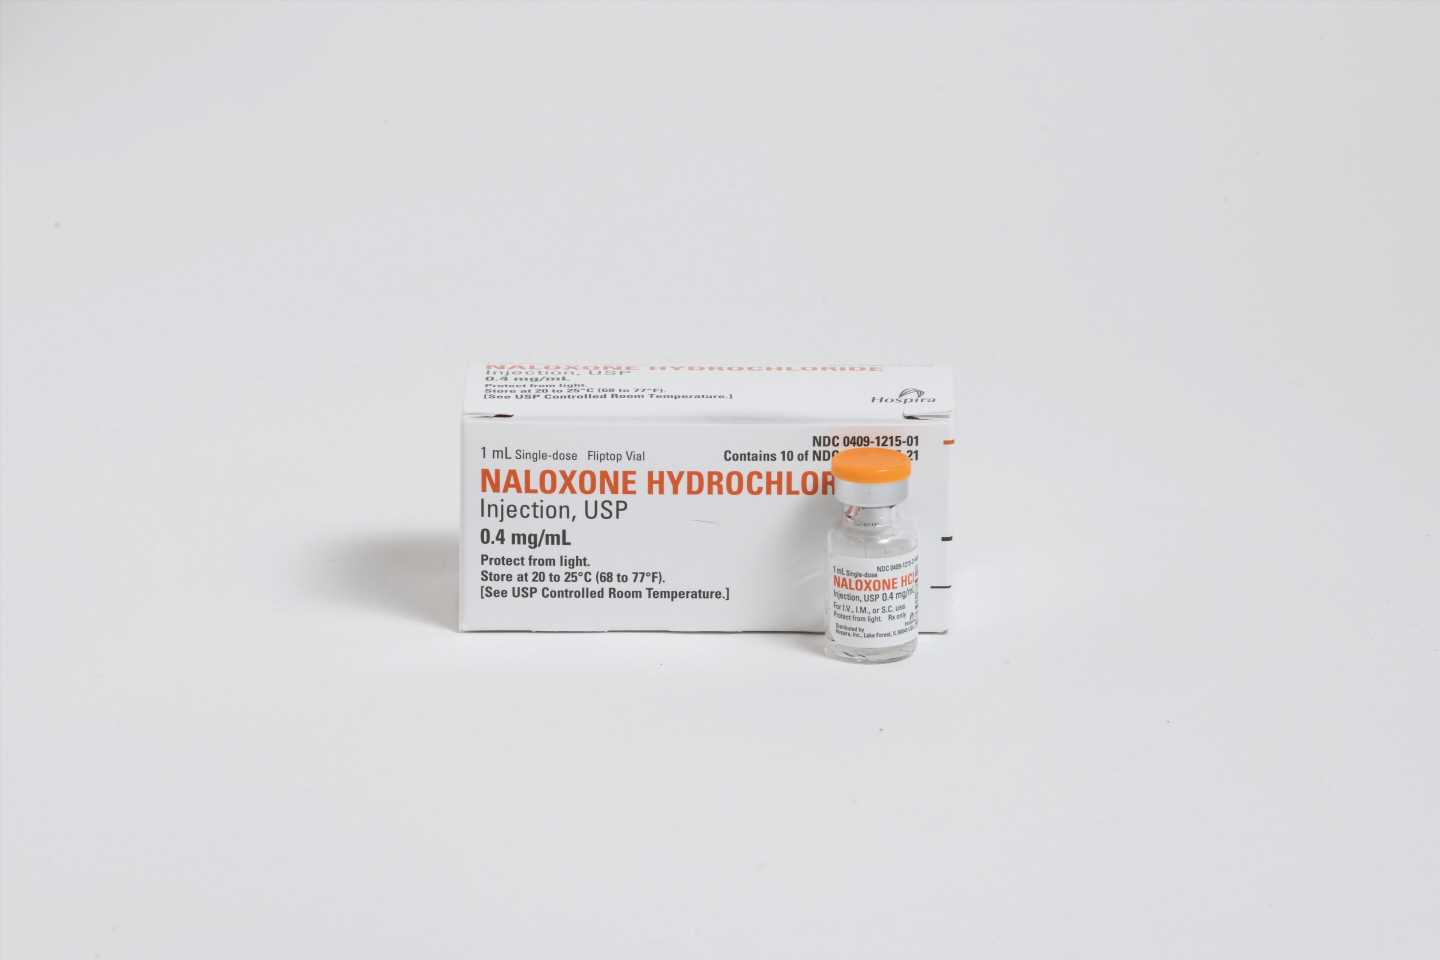 Ask the pediatrician: What do parents need to know about naloxone for opioid overdose?